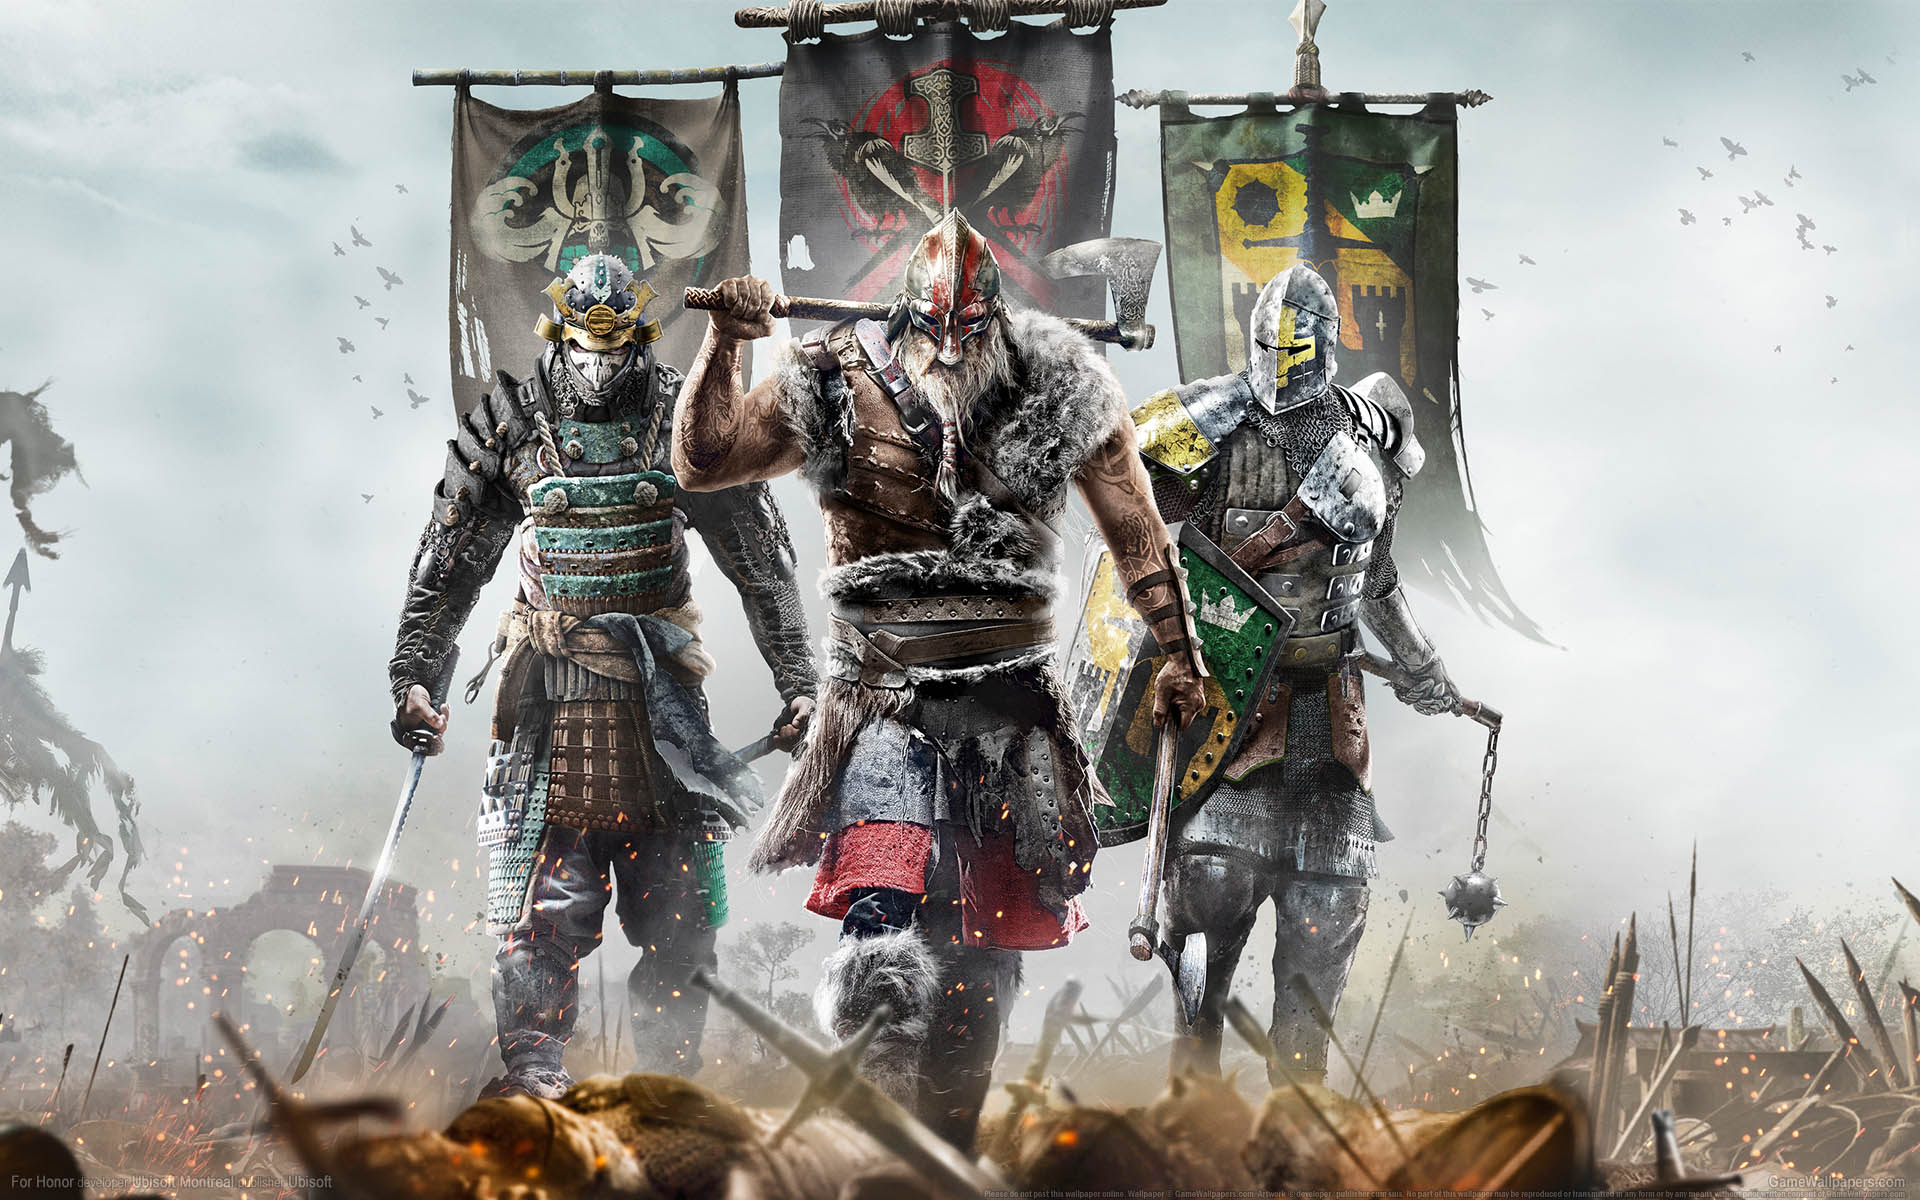 For Honor achtergrond 01 1920x1200